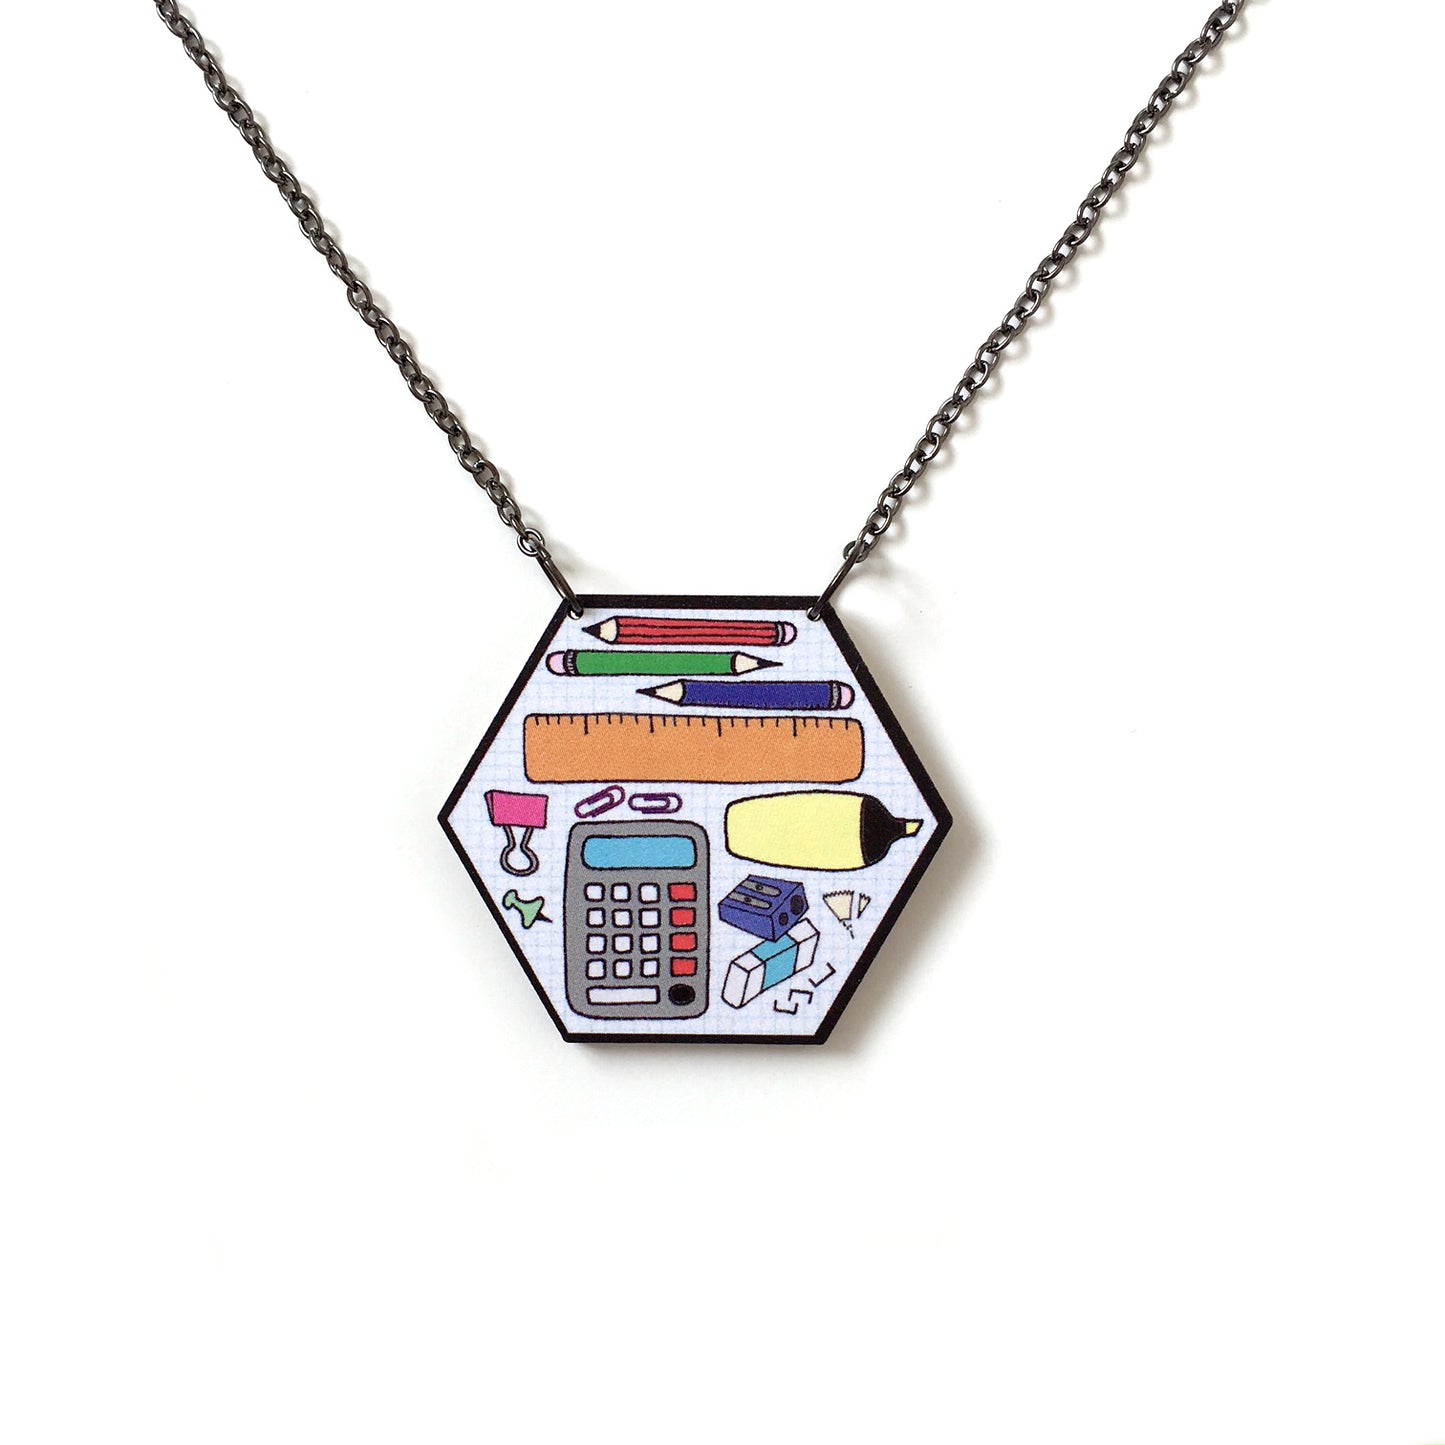 Stationery hexagon pencil case statement necklace